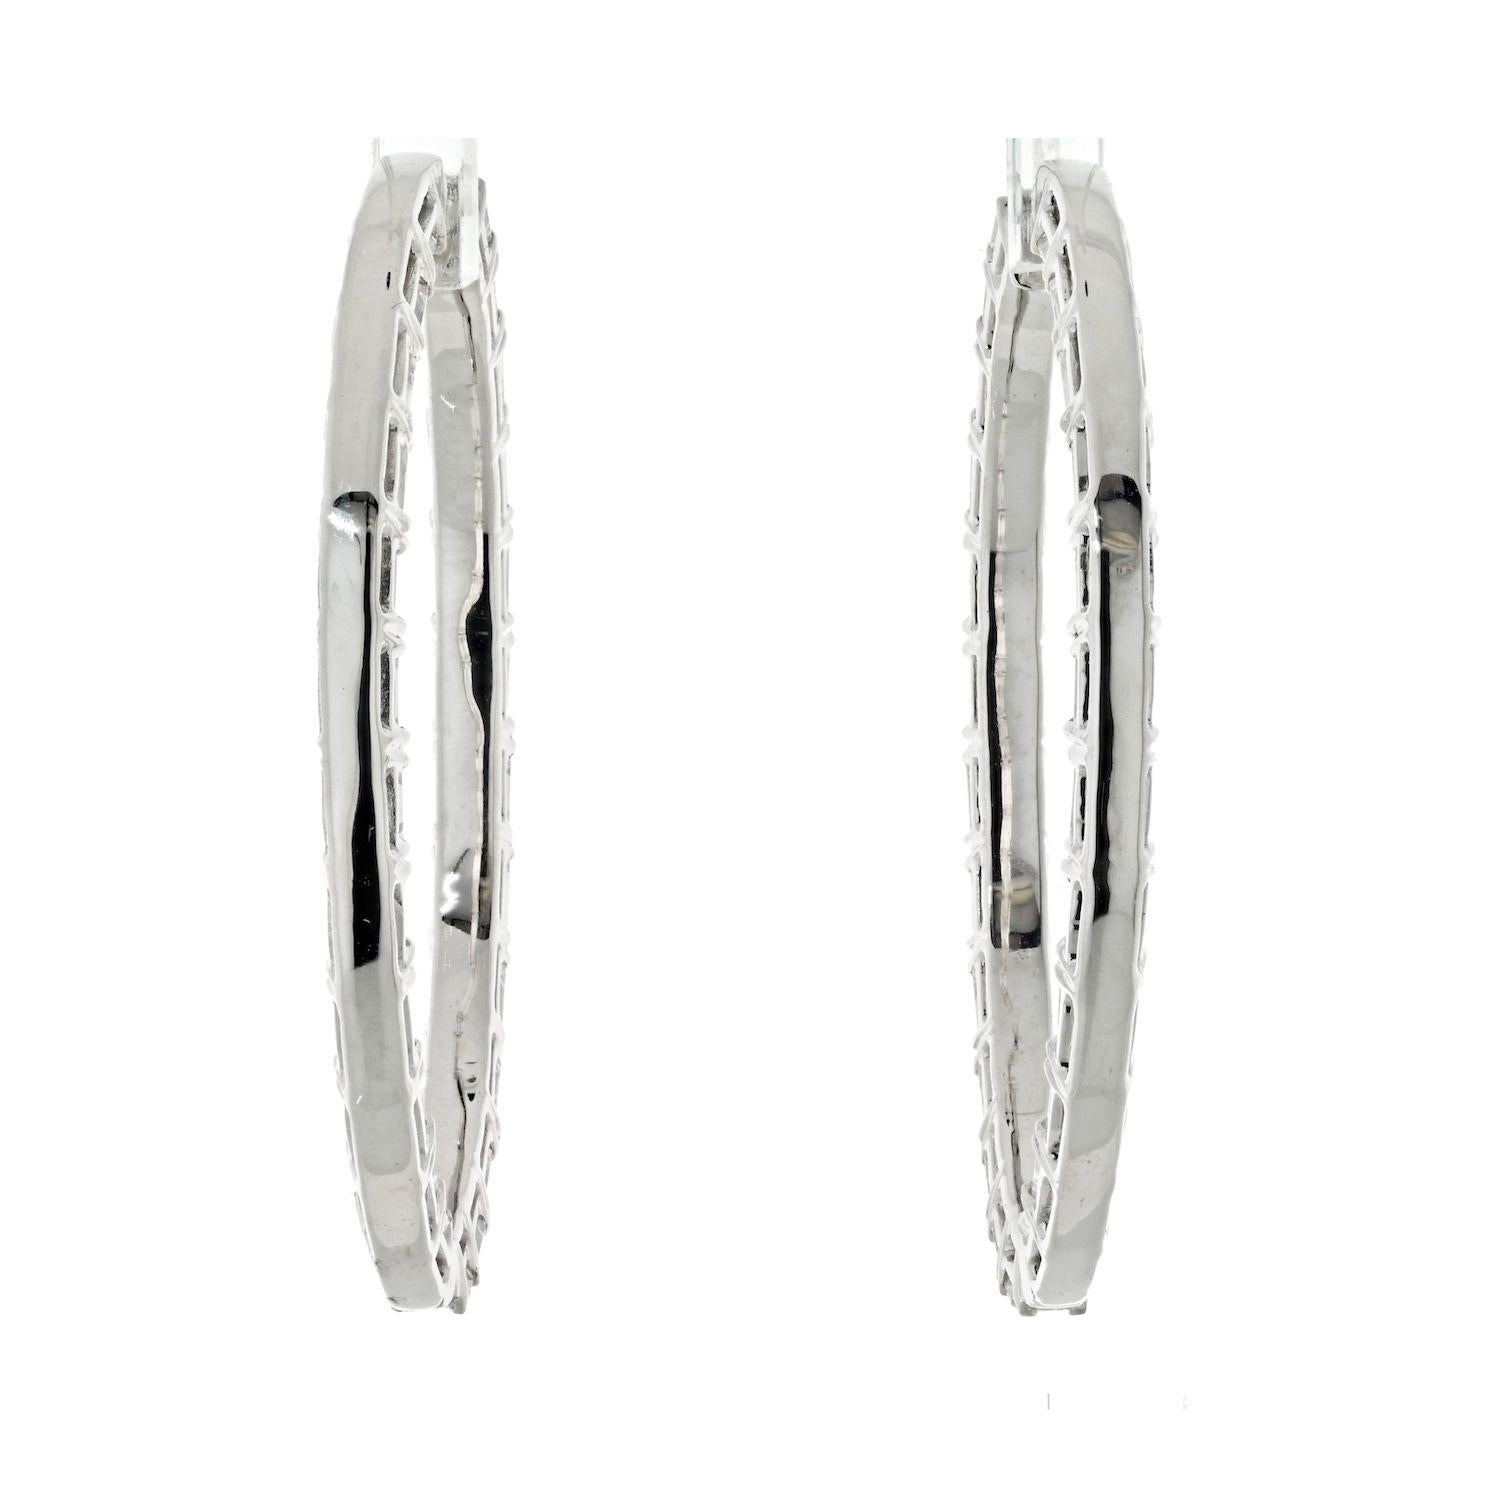 You won't find these durable quality diamond hoops just anywhere. Trust the xperts of fine estate and designer jewelry like ourselves because we sure do cherry pick only the very special items for our stock. Slick and elegant with a flirty feel